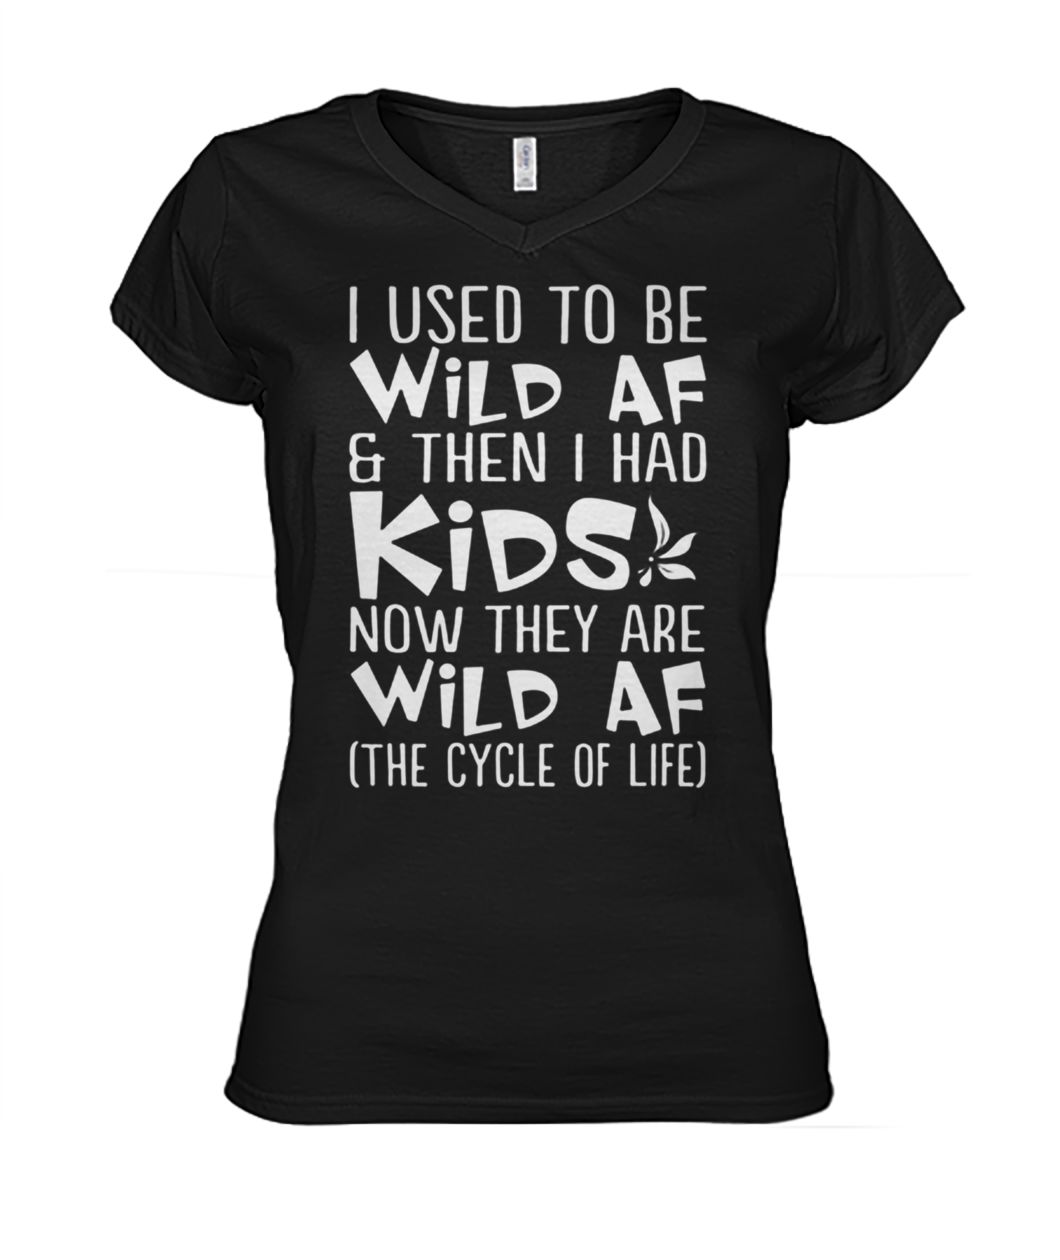 I used to be wild af and then I had kids now they are wild af the cycle of life women's v-neck